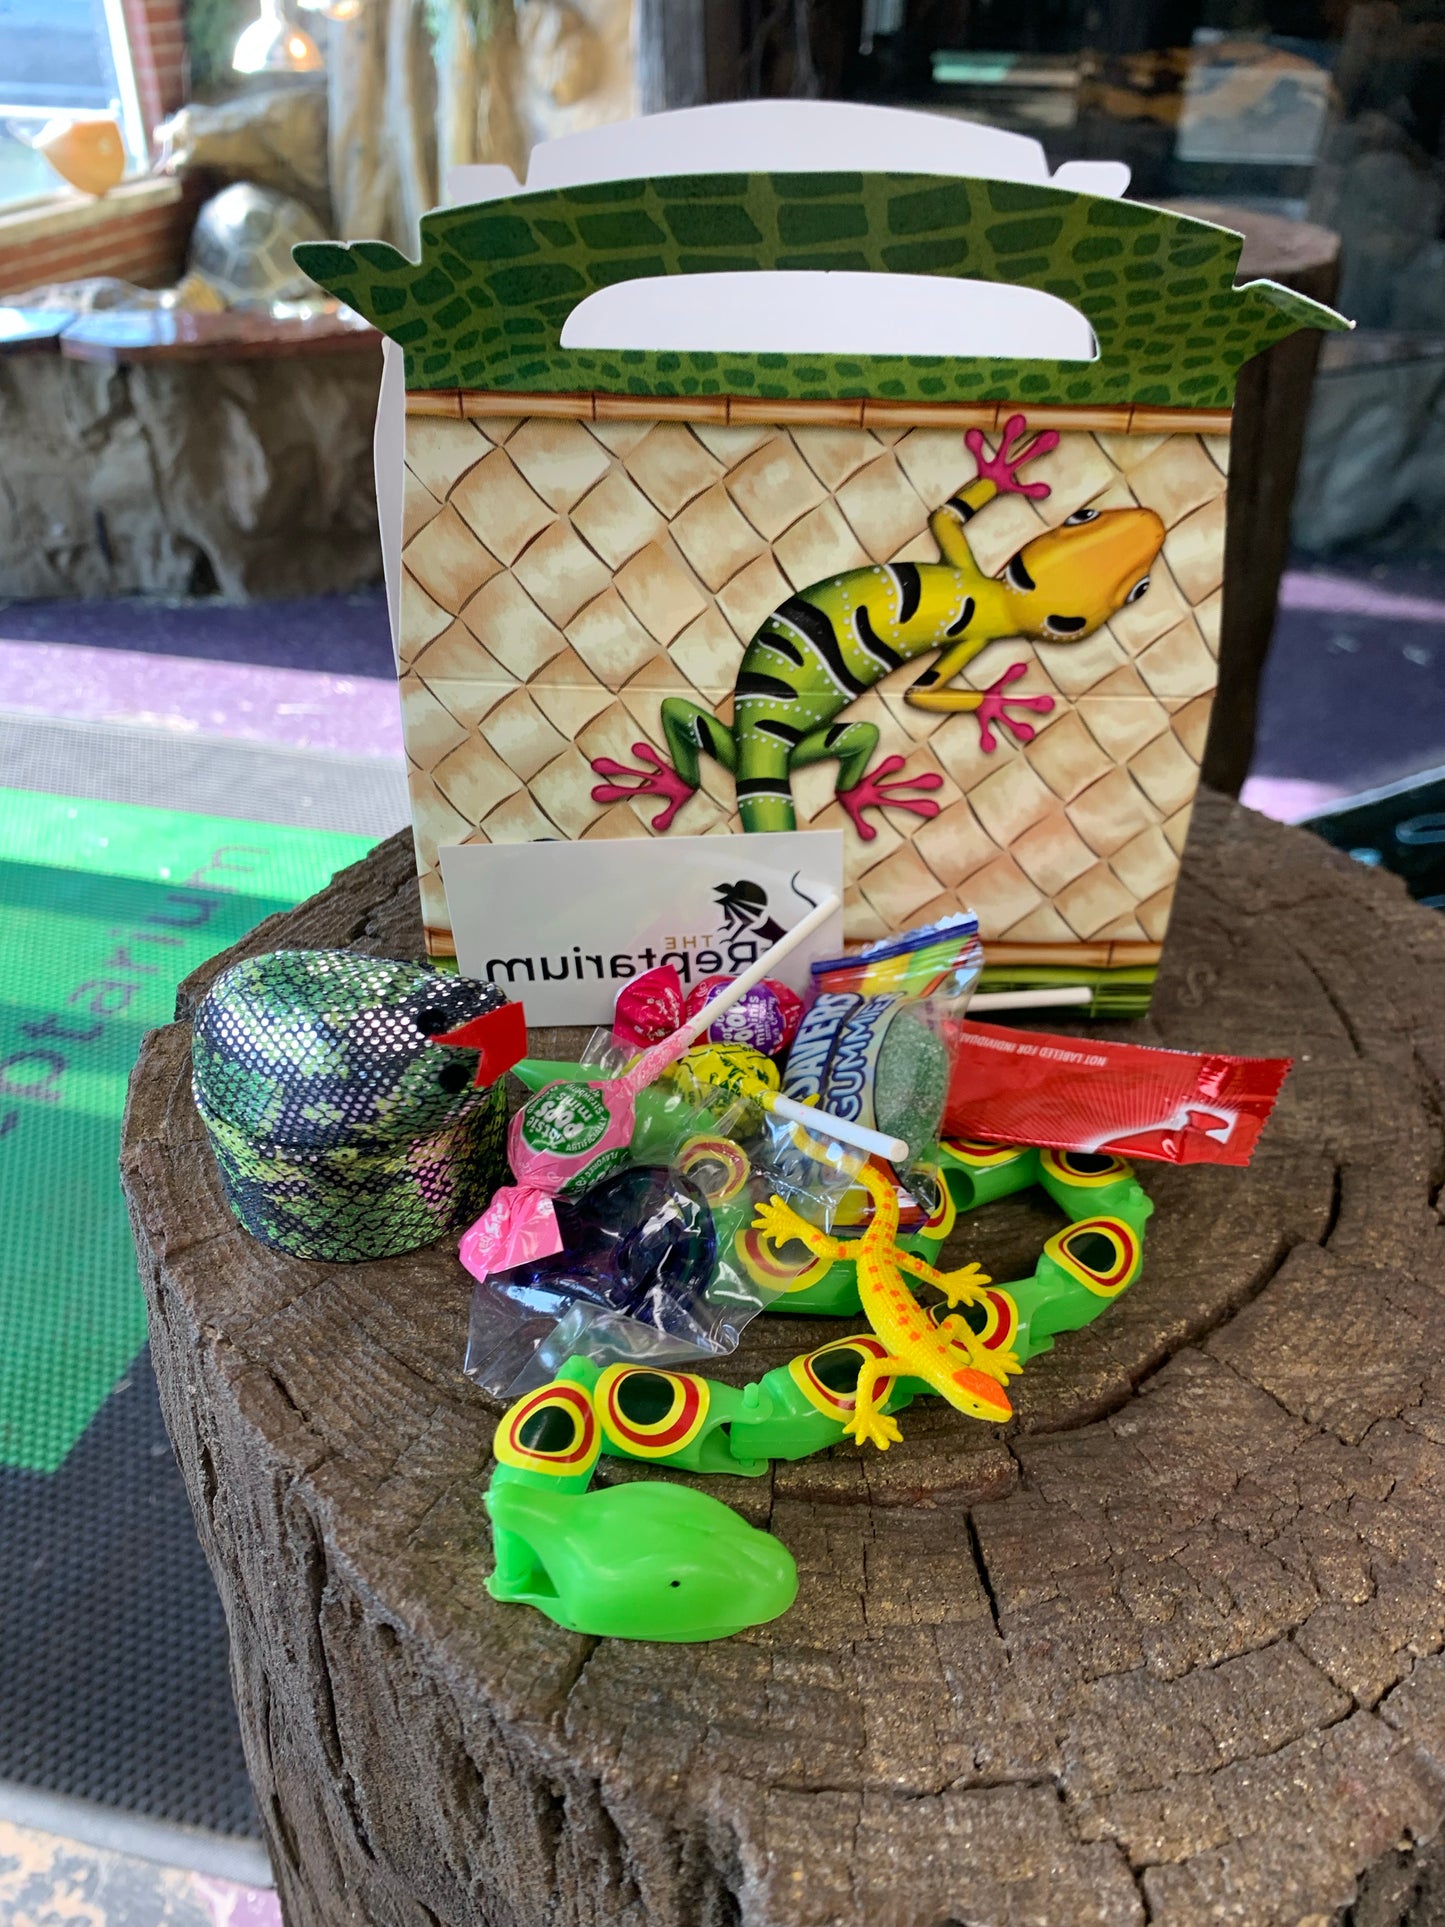 Reptile-Themed Goodie Boxes - Add To Your Private Event.